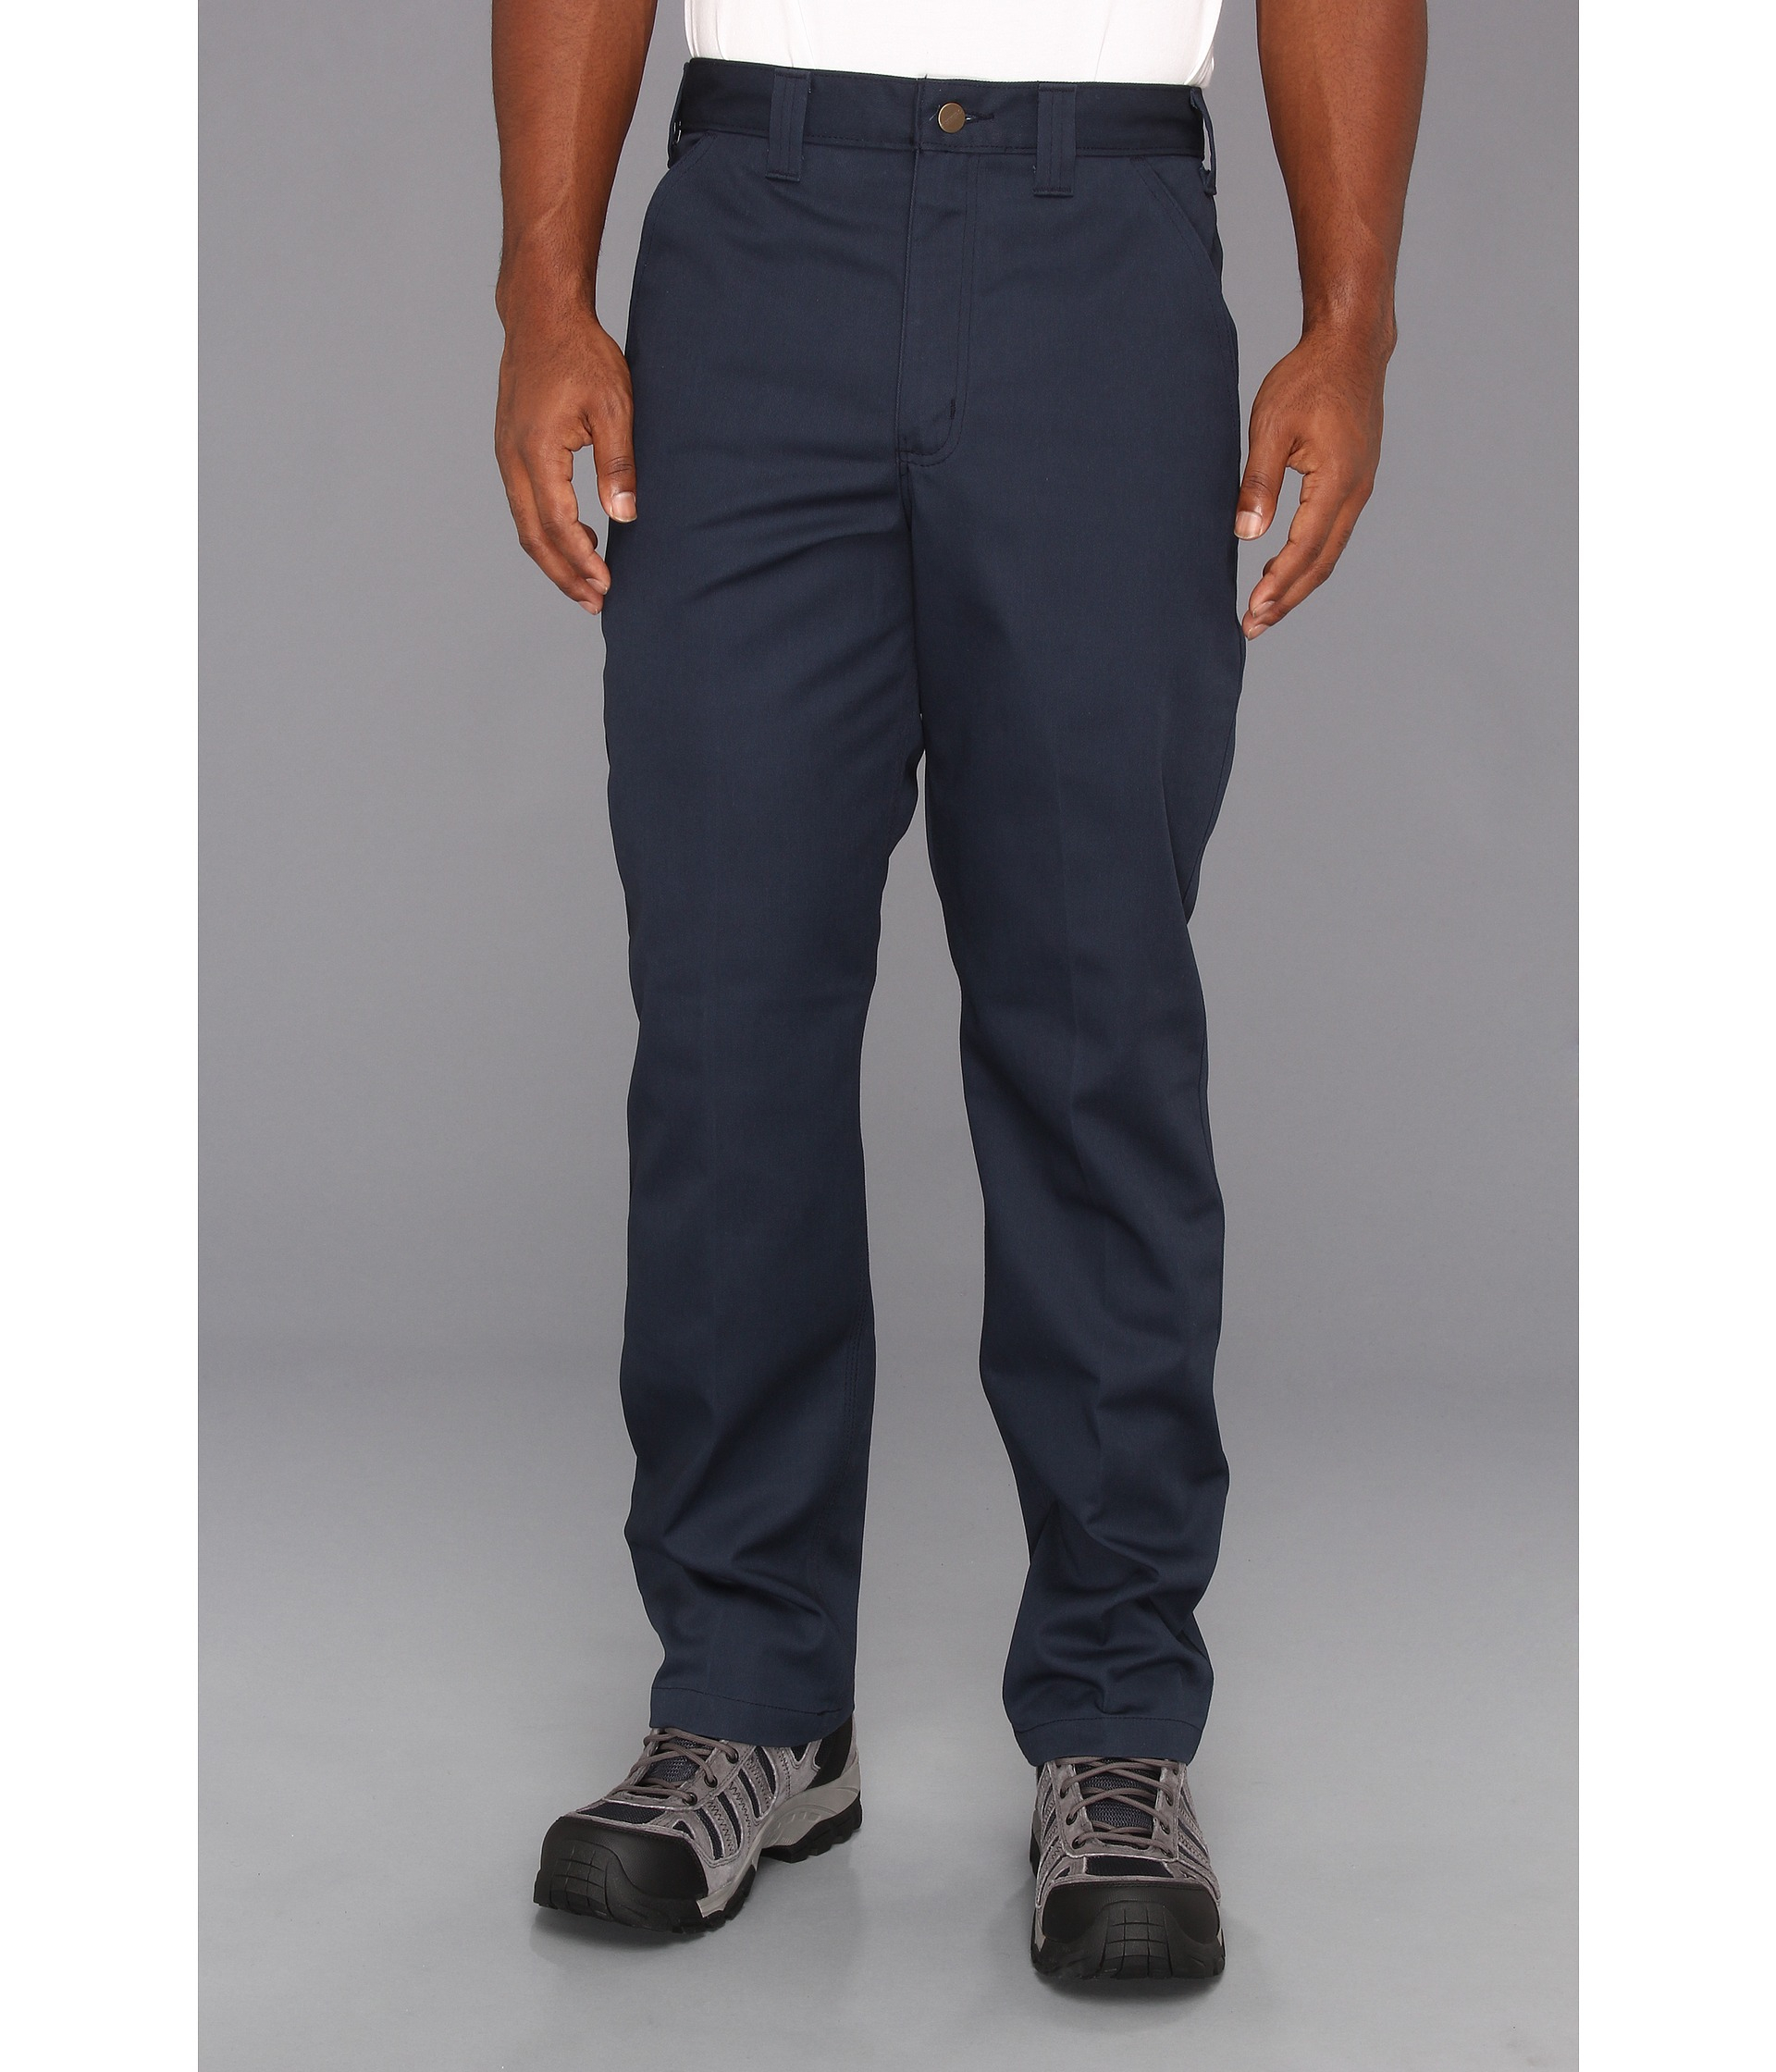 Lyst - Carhartt Twill Work Pant in Blue for Men